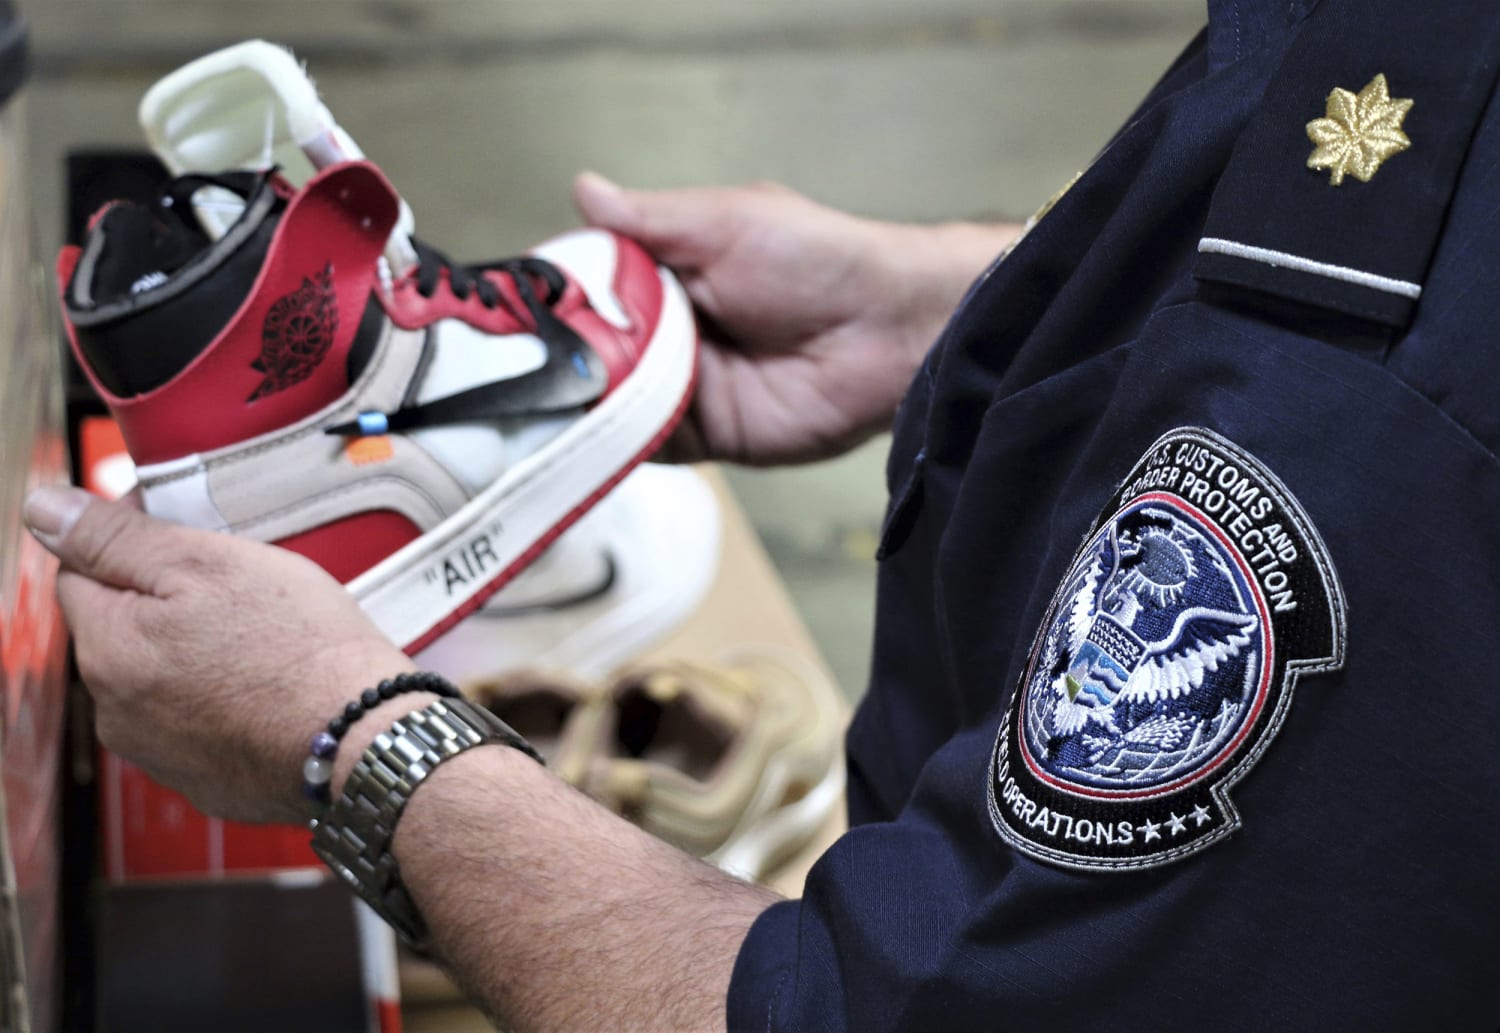 fake Nikes seized in Los Angeles-area port